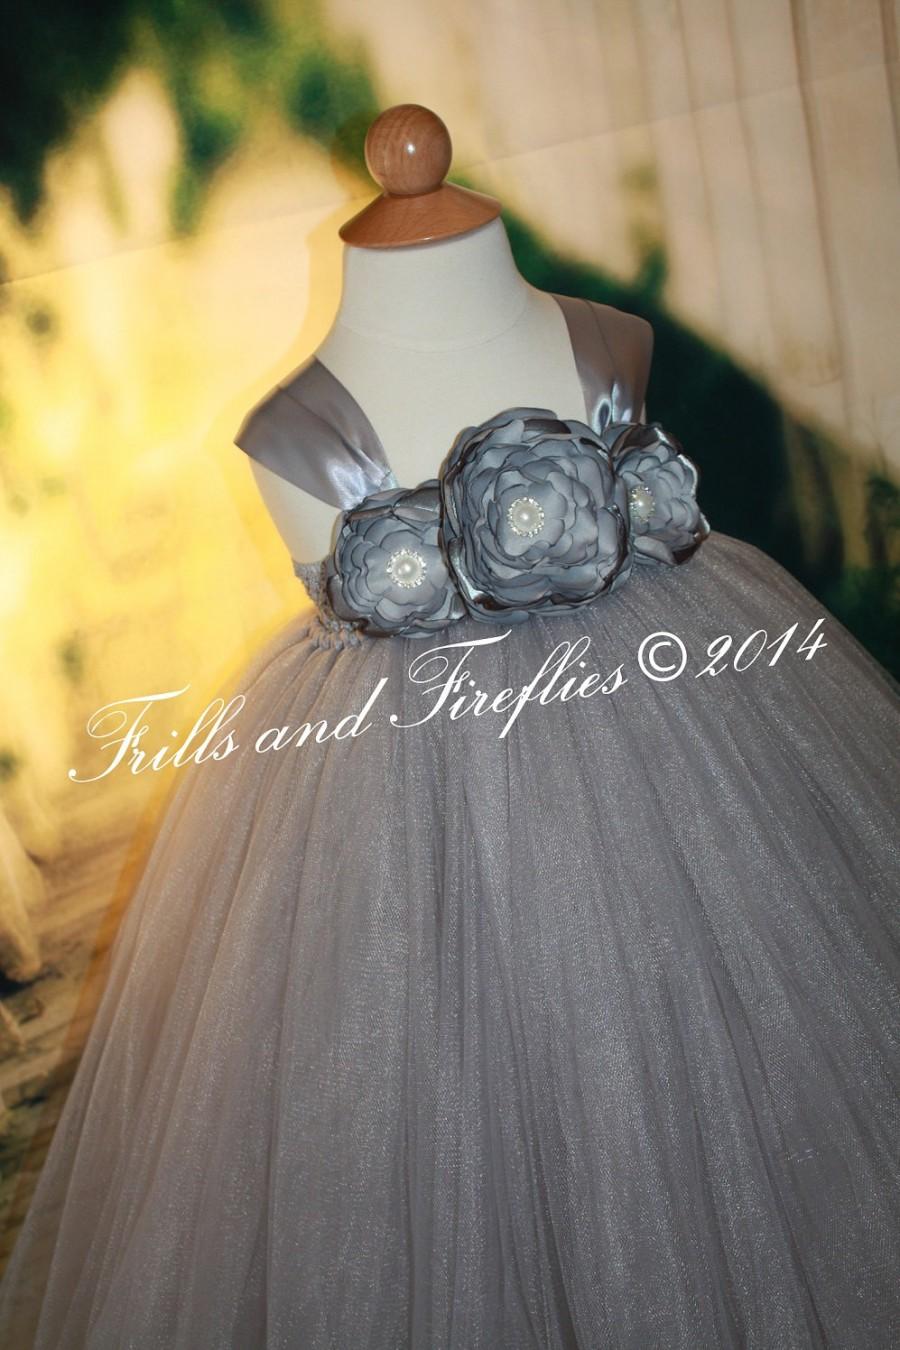 Hochzeit - Silver Gray/grey Flower girl Dress with Satin Flowers and Gray Satin Ribbon Shoulder Straps, Weddings, Birthdays 1t,2t,3t,4t,5t, 6, 8, 10